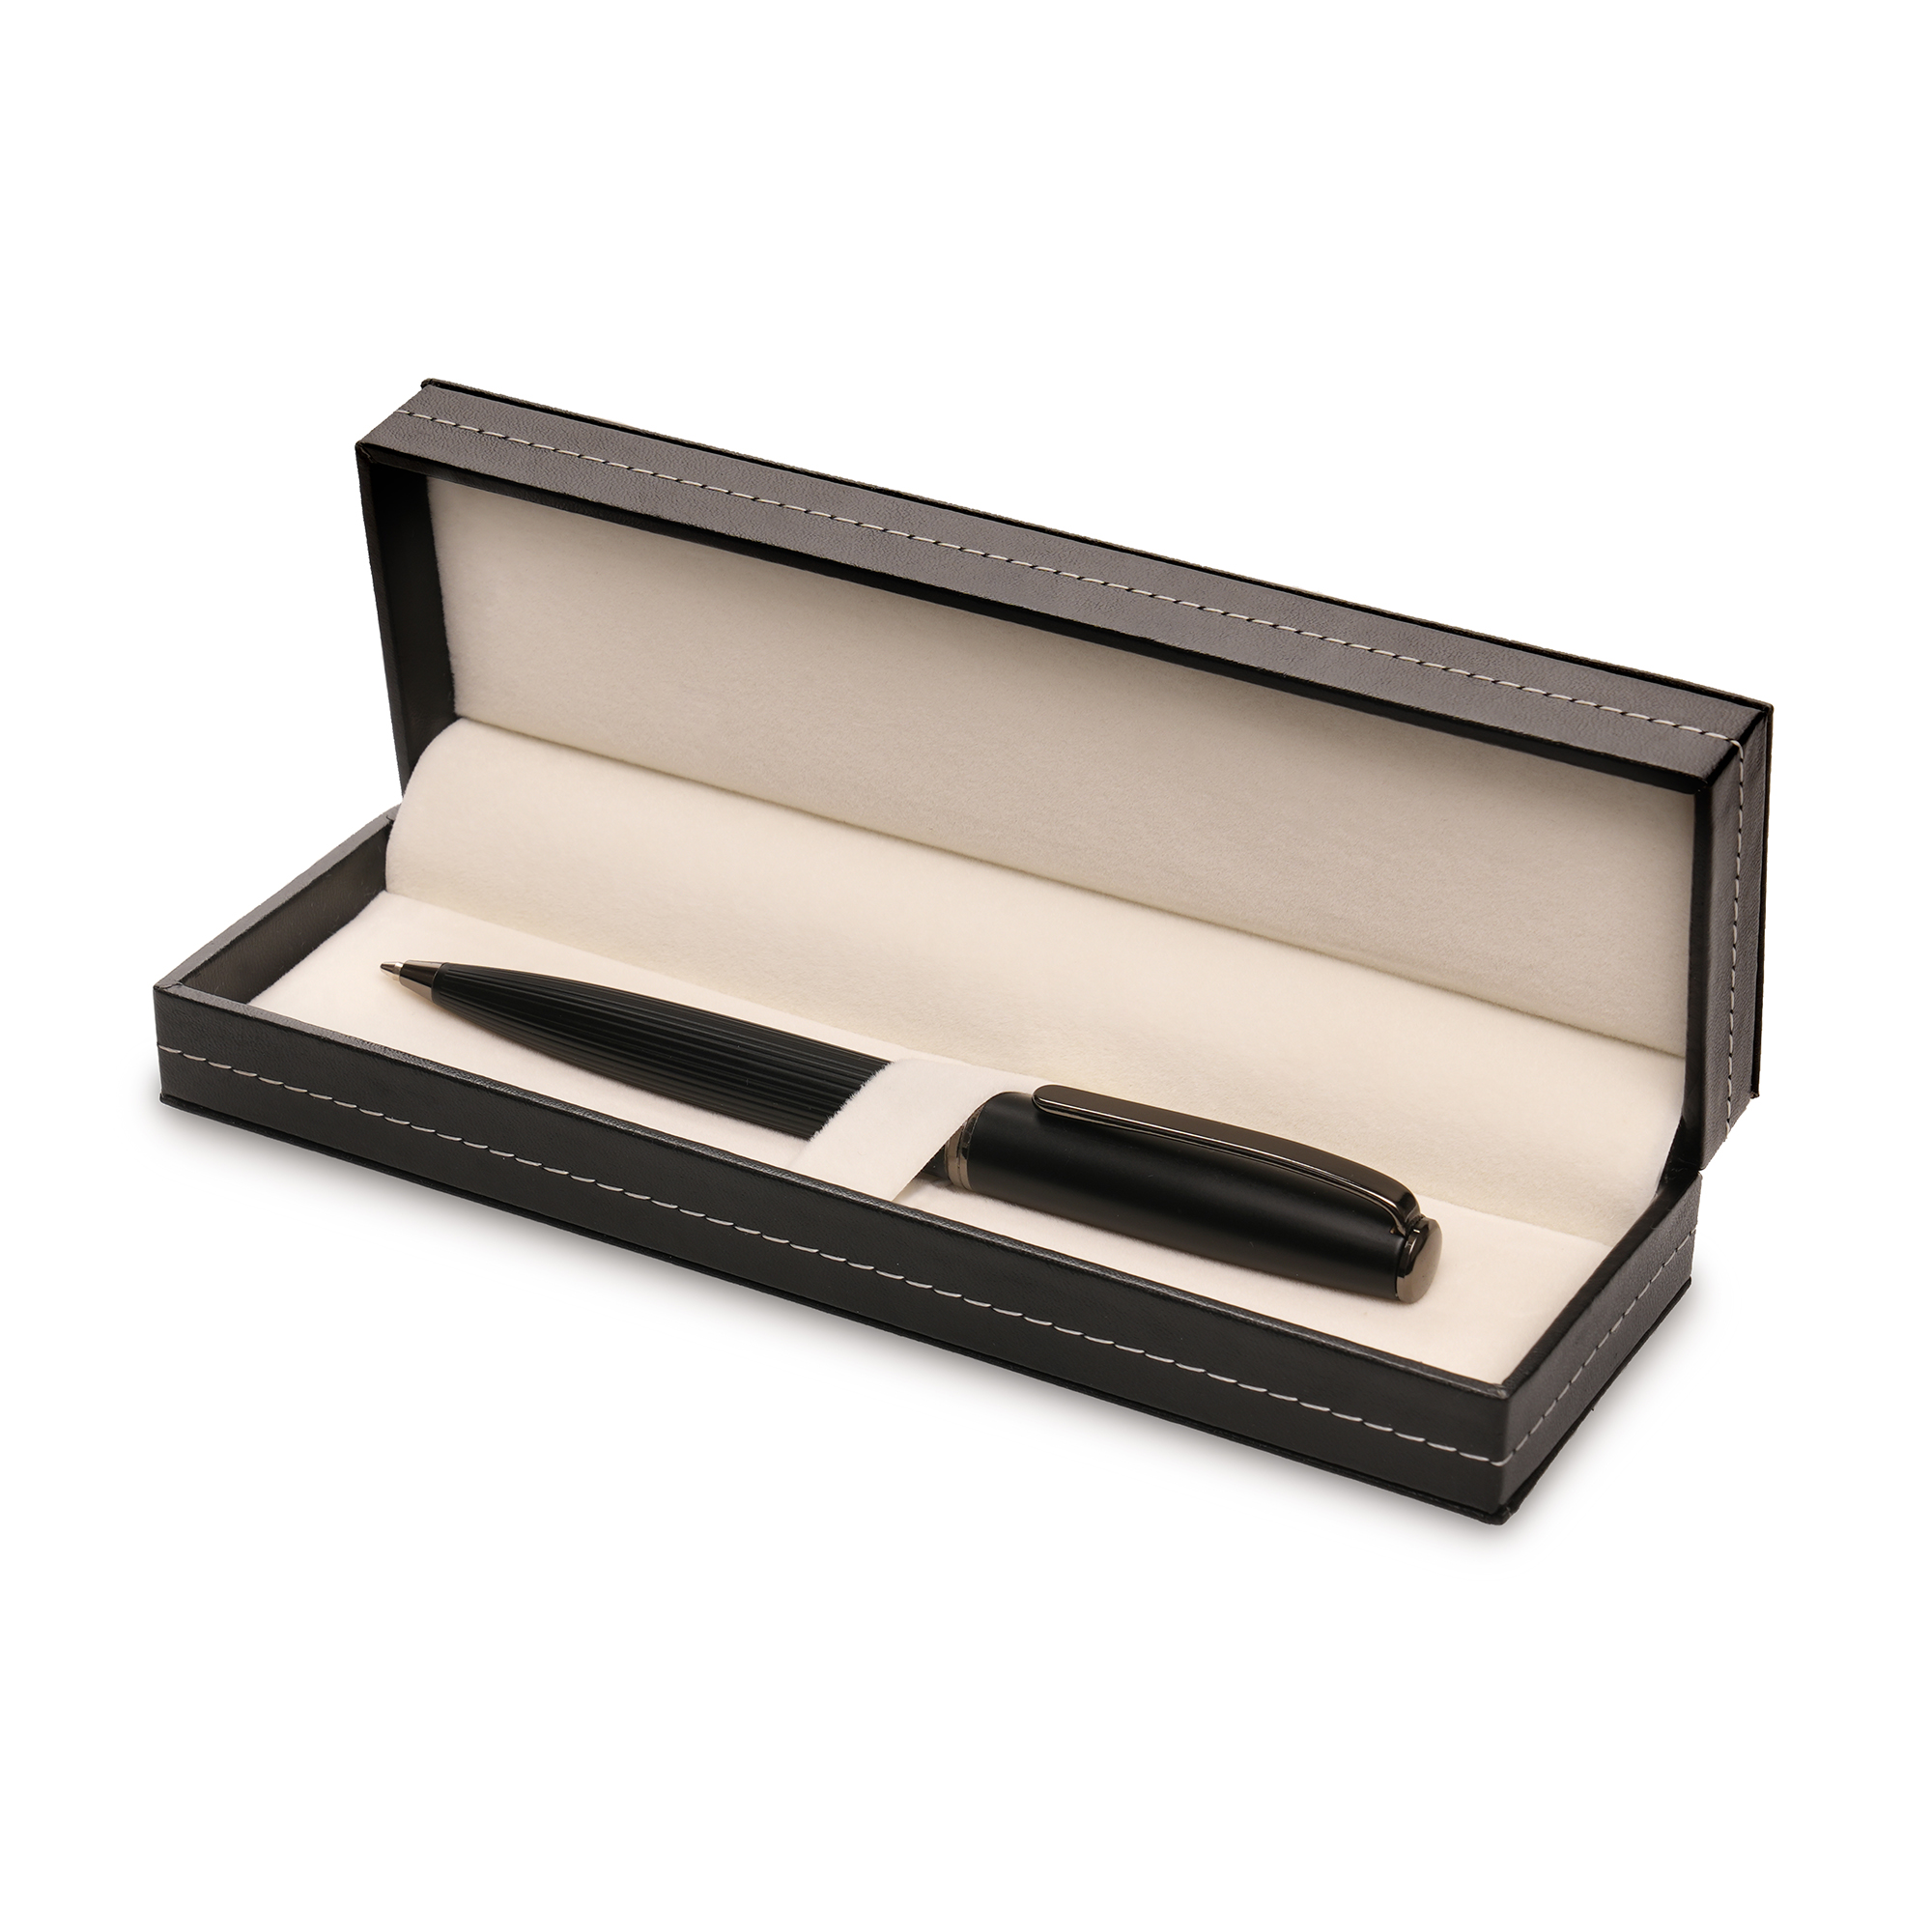 Elevate your gift-giving with the Stitch single gift box. This premium hinged lid box features exquisite stitch detailing and a plush velvet interior, perfect for your prestige pens.